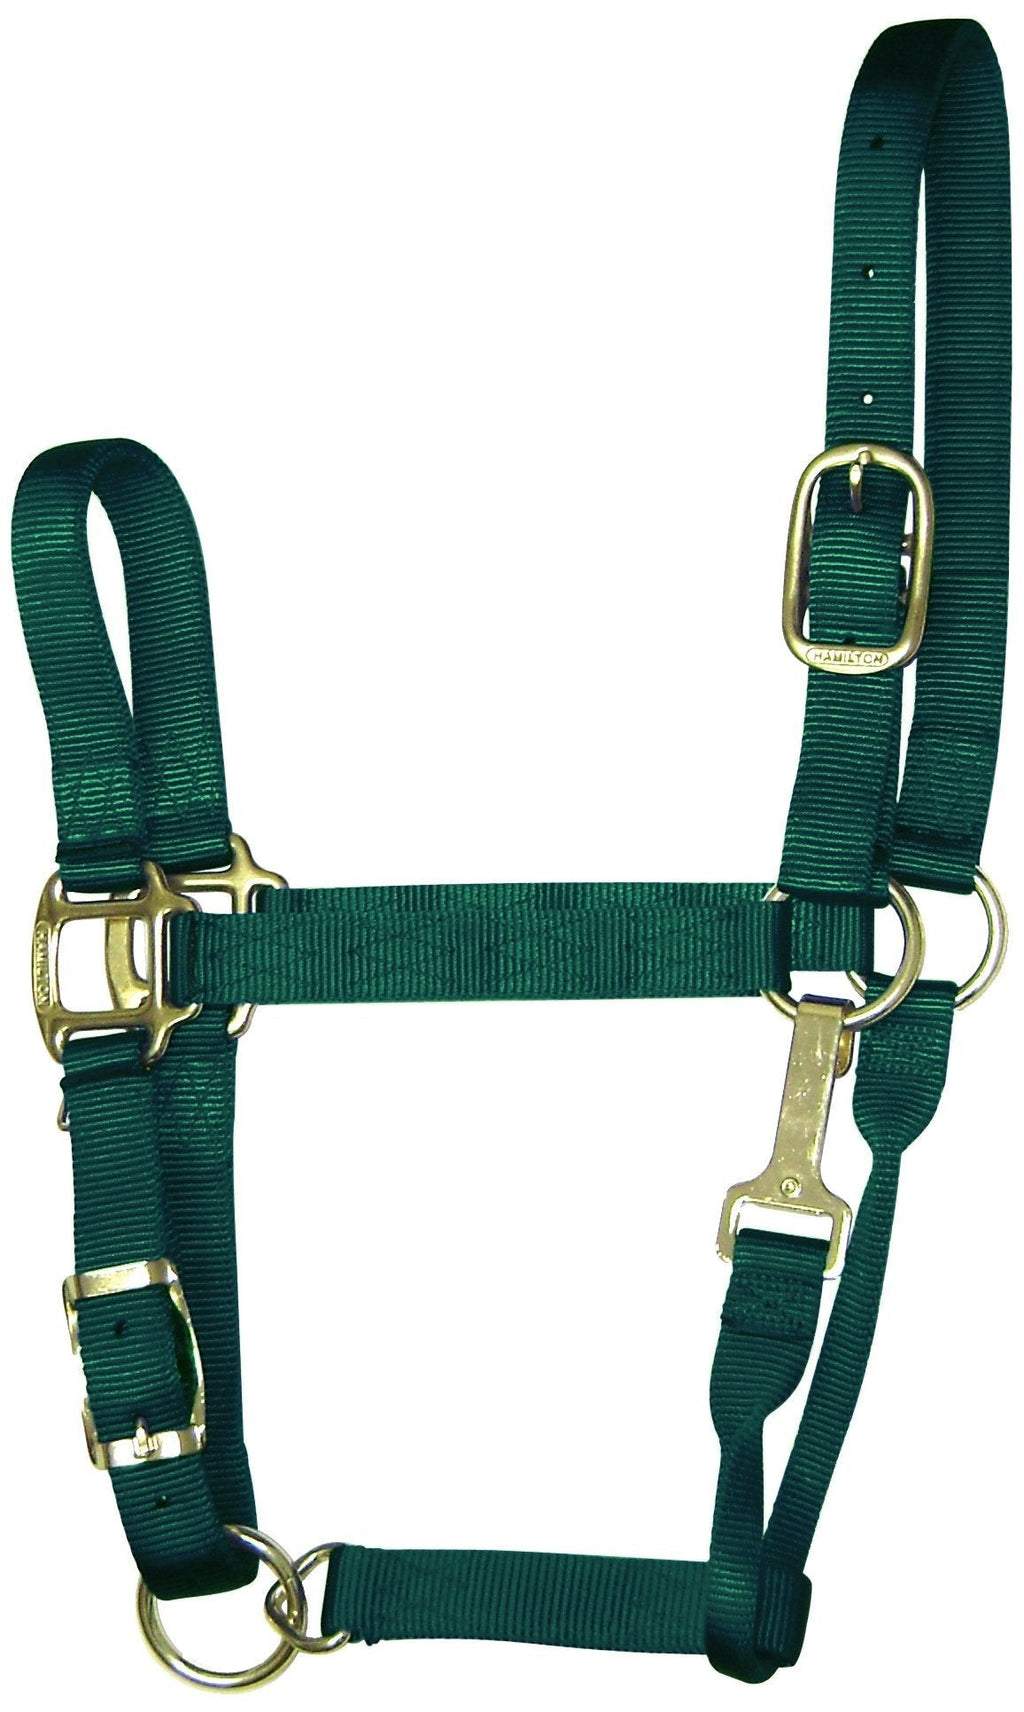 [AUSTRALIA] - Hamilton 1-Inch Nylon Adjustable Quality Halter with Chin Snap for 1100 to 1600-Pound Horse, Large, Dark Green 